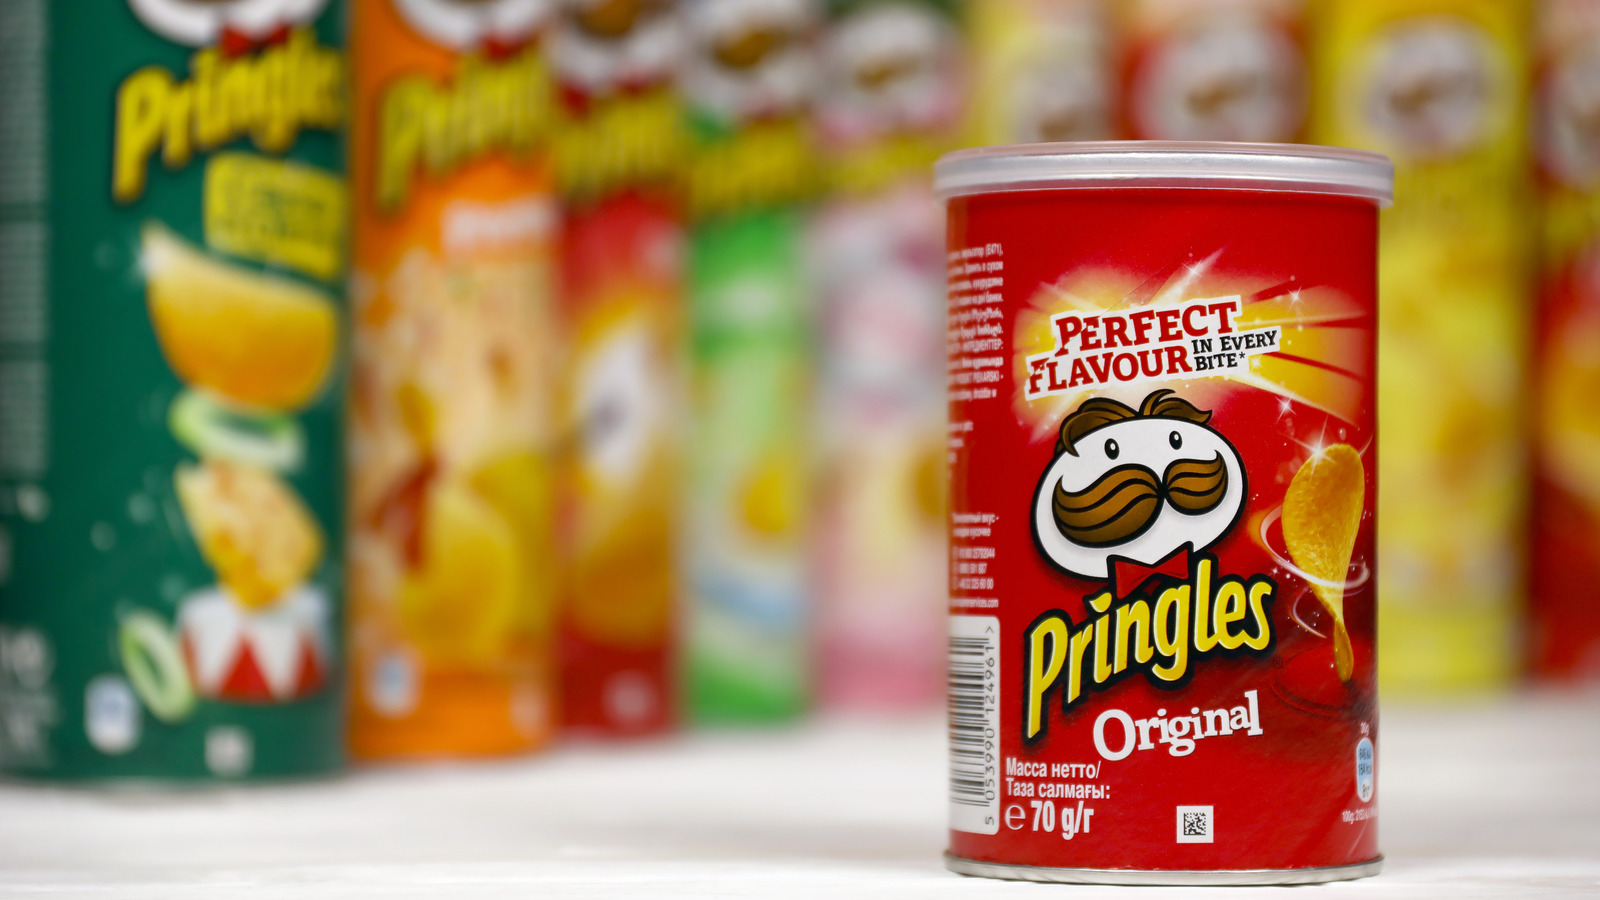 Pringles Gives A Glimpse Of Meghan Trainor As The Star Of Its 2023